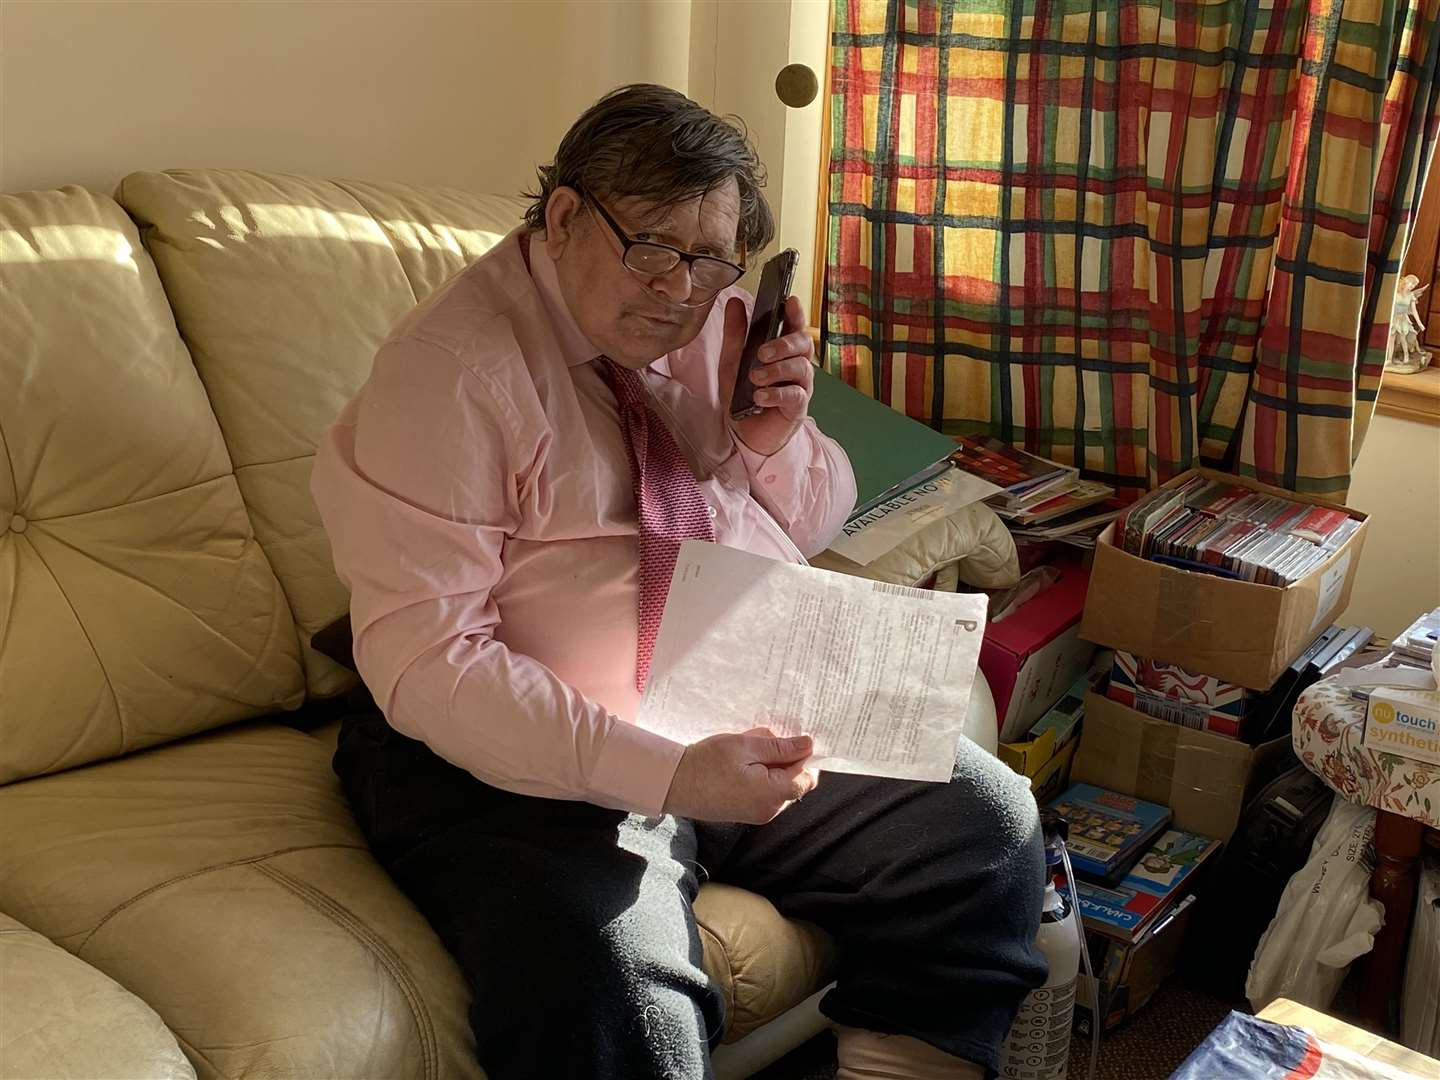 Peter Bodek was so angry when he got a letter informing him of the 15p general increase in benefits that he phoned up the Pension Service to complain.